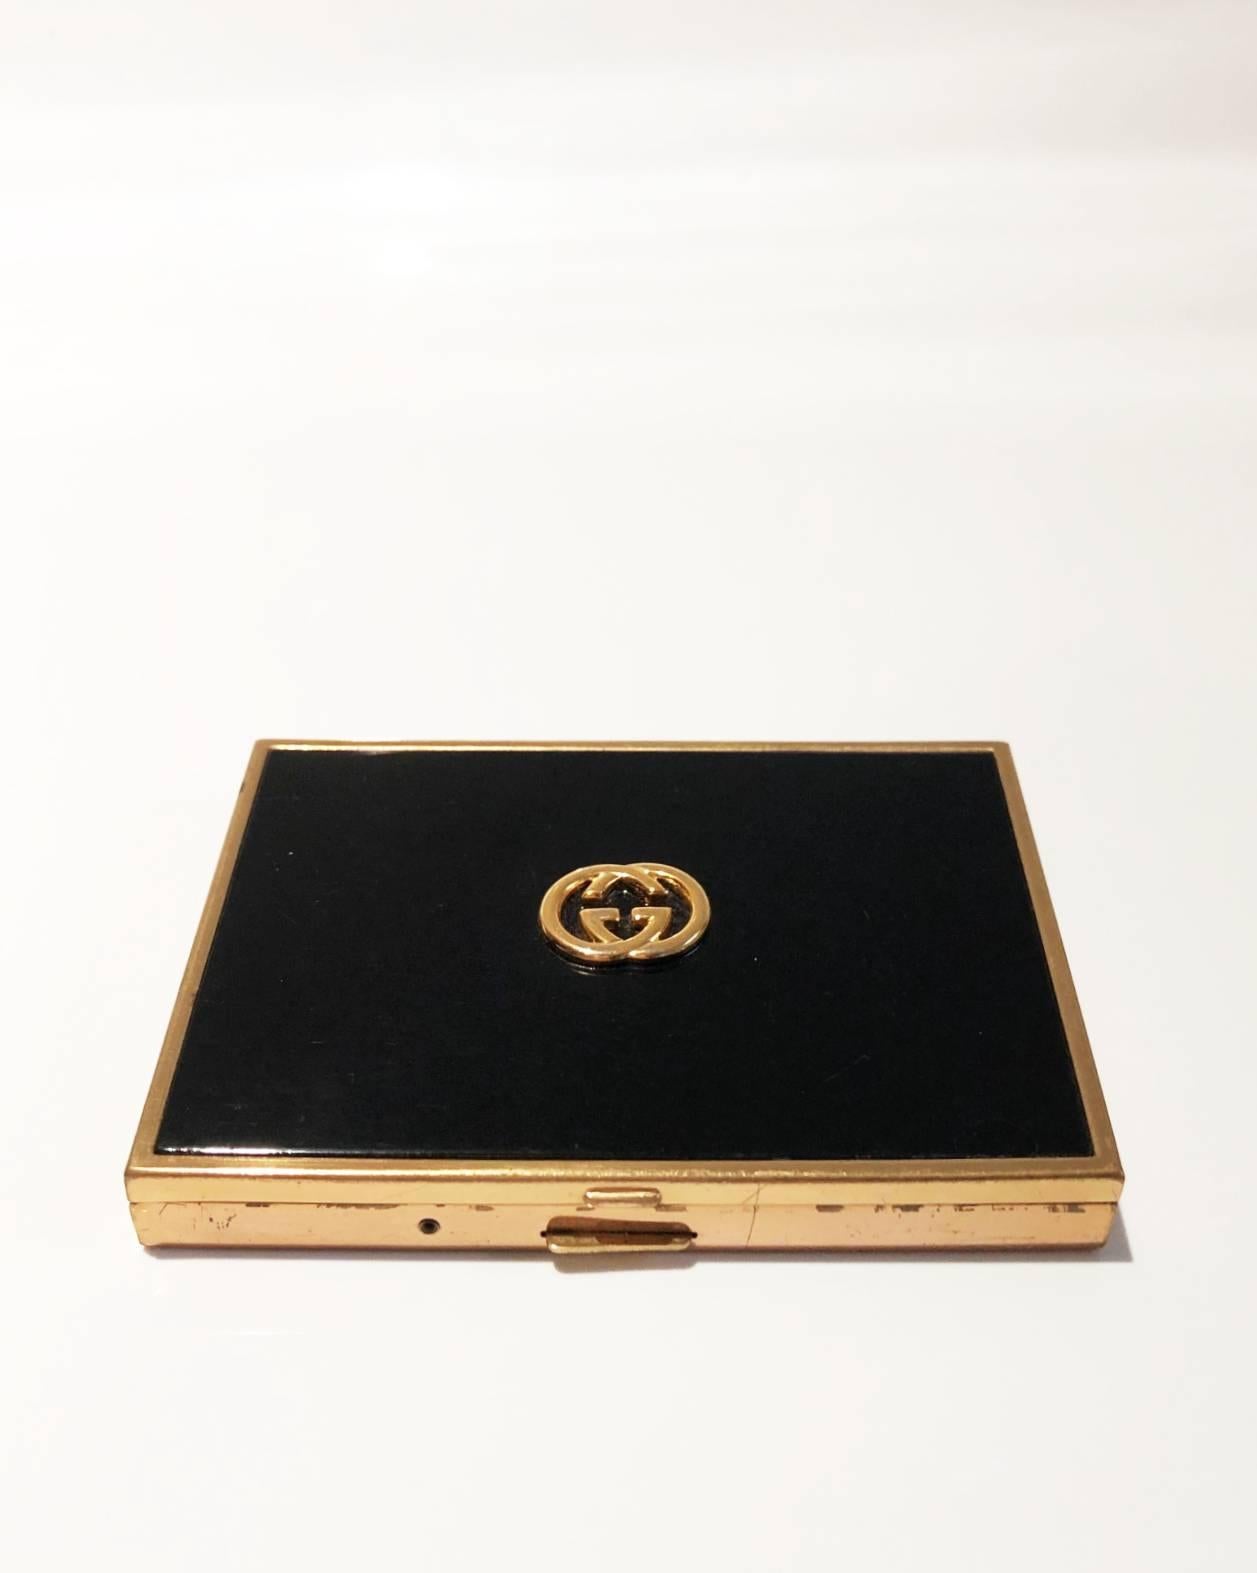 Timeless elegance from Gucci. This is a compact cigarette case / smoking box perfect for cocktail occasions. It features black varnished top with GG logo gold metal ware,  black enamel colour and has the Gucci logo on the top and inside has the name